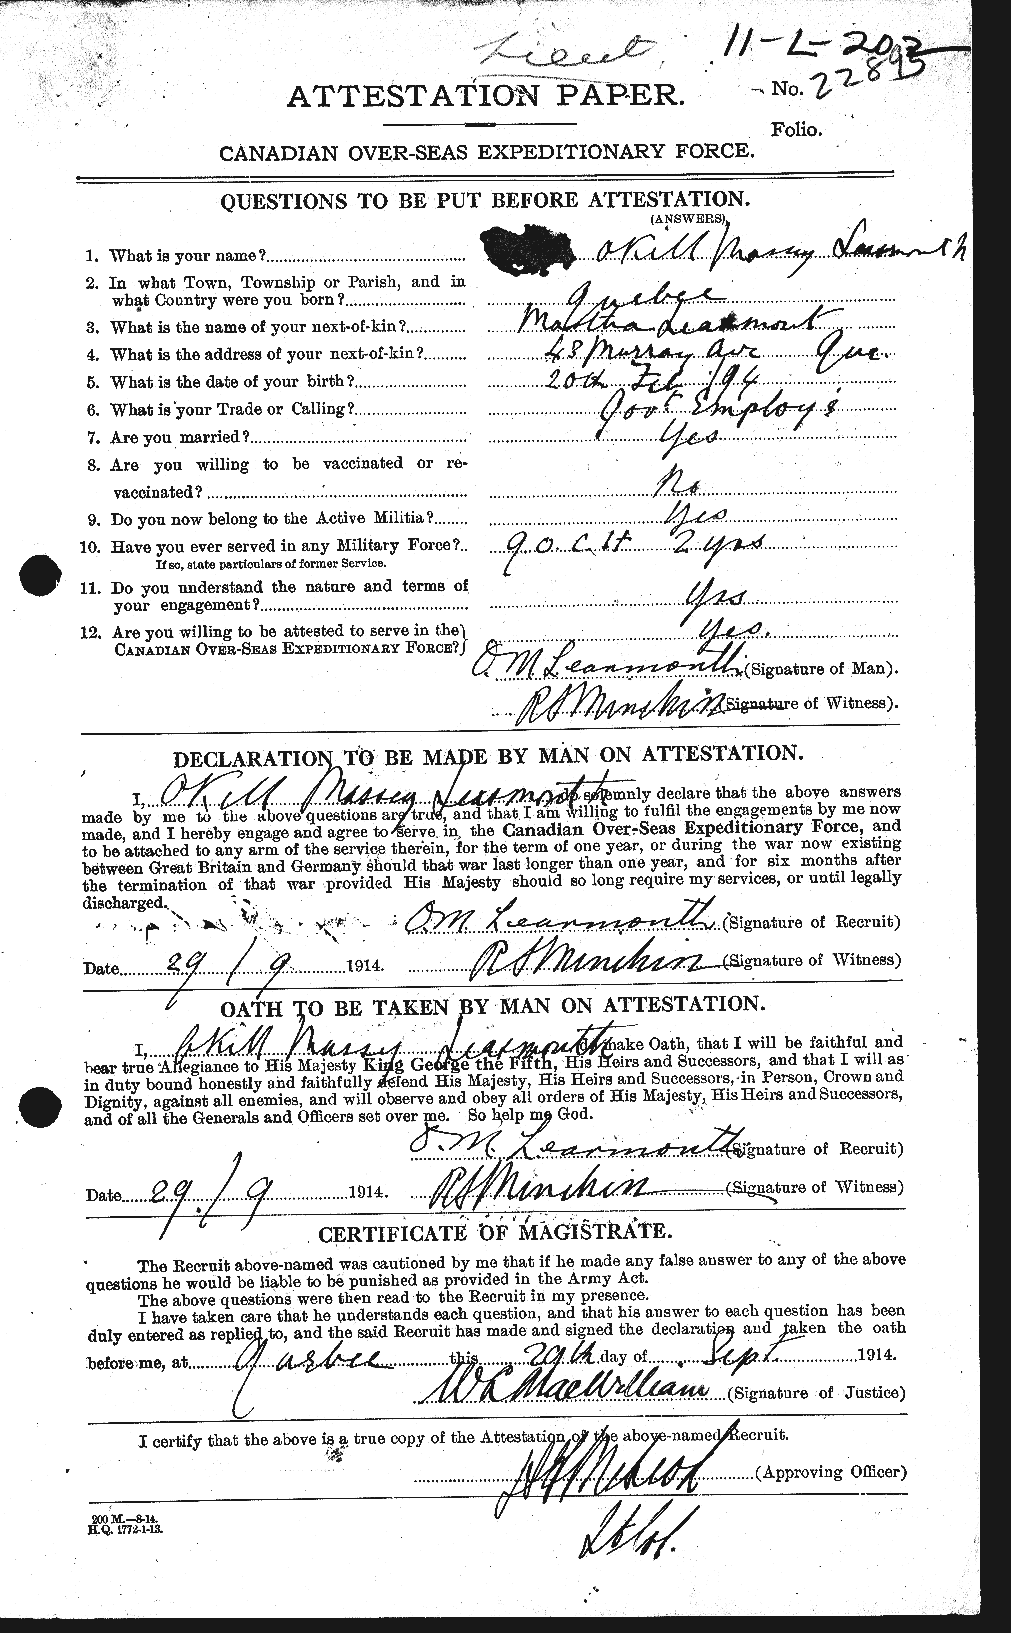 Personnel Records of the First World War - CEF 206304a